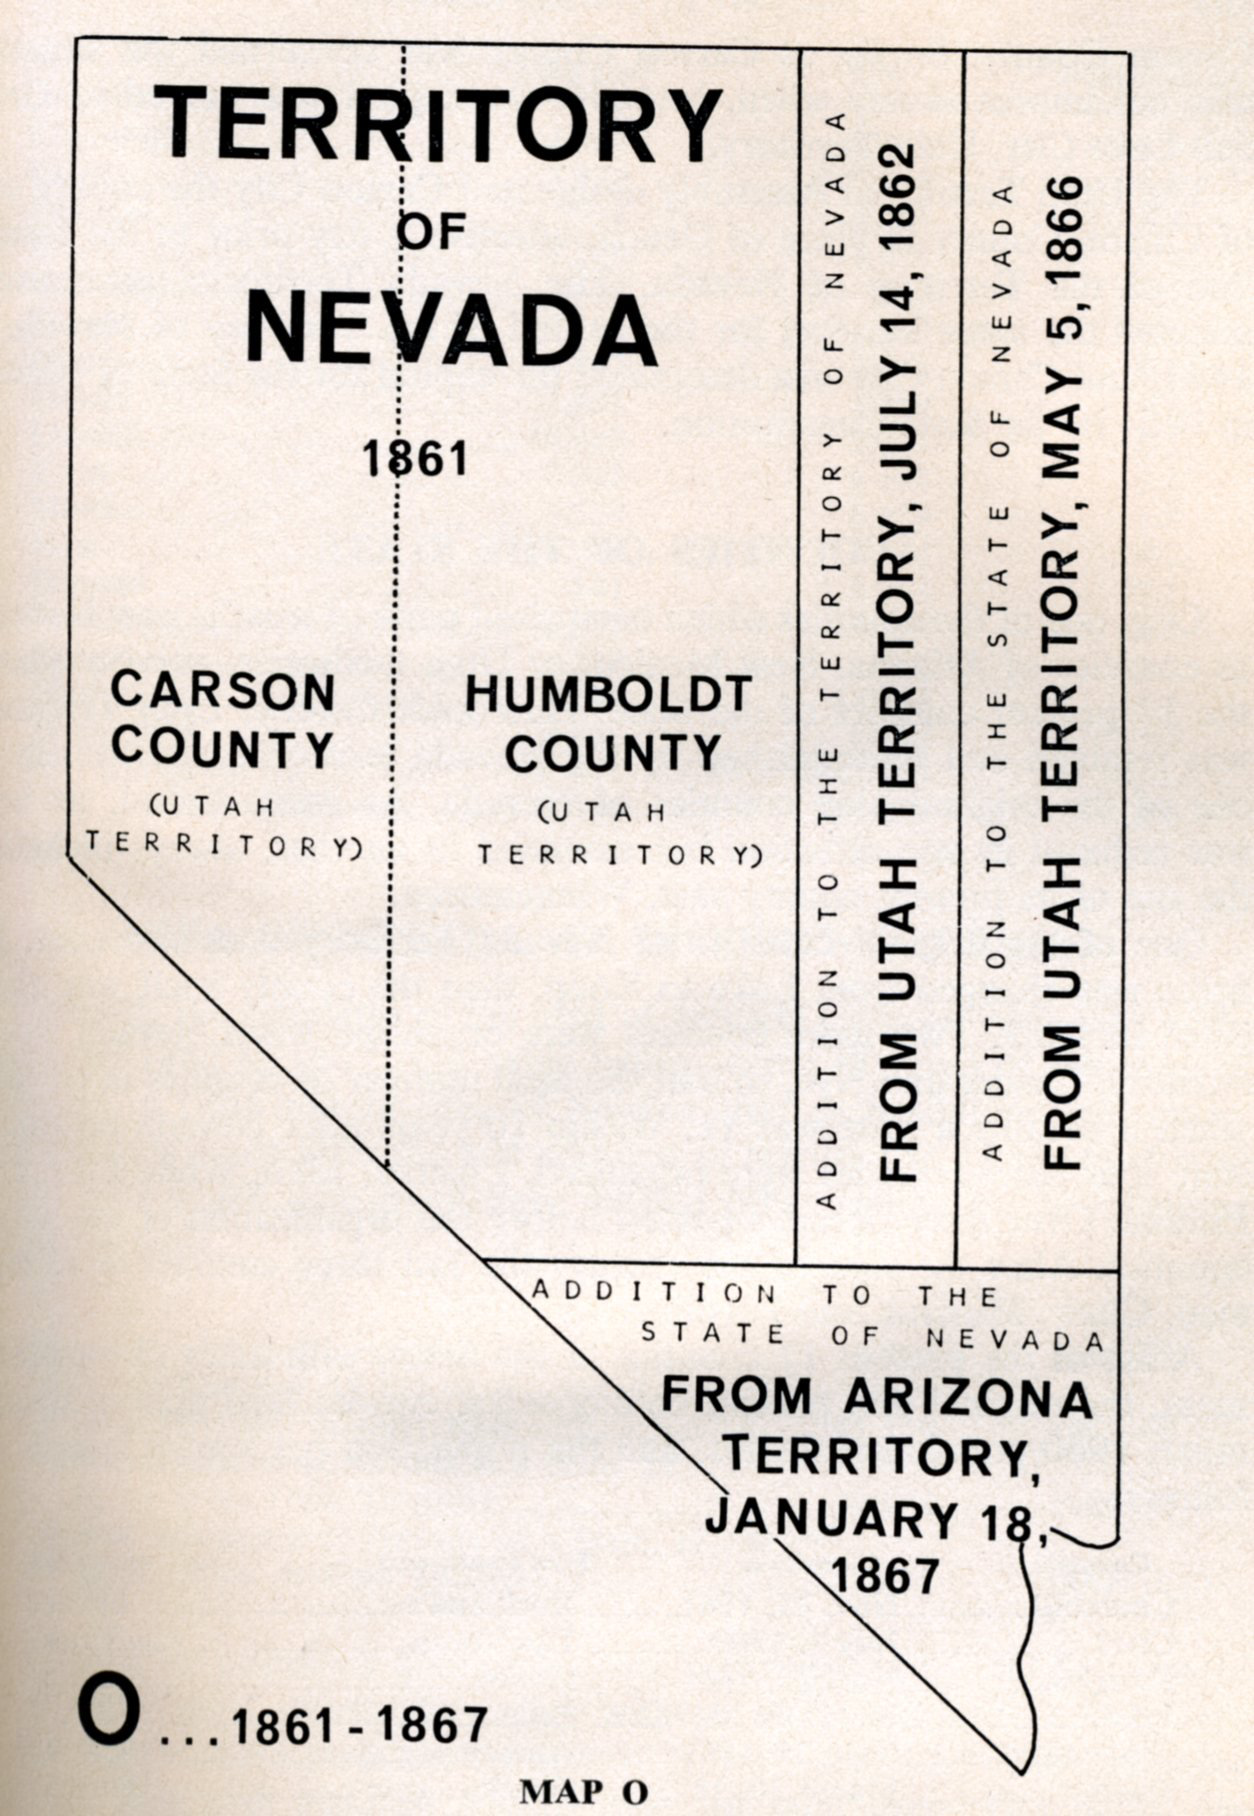 HOW NEVADA GREW FROM 1861 TO 1867